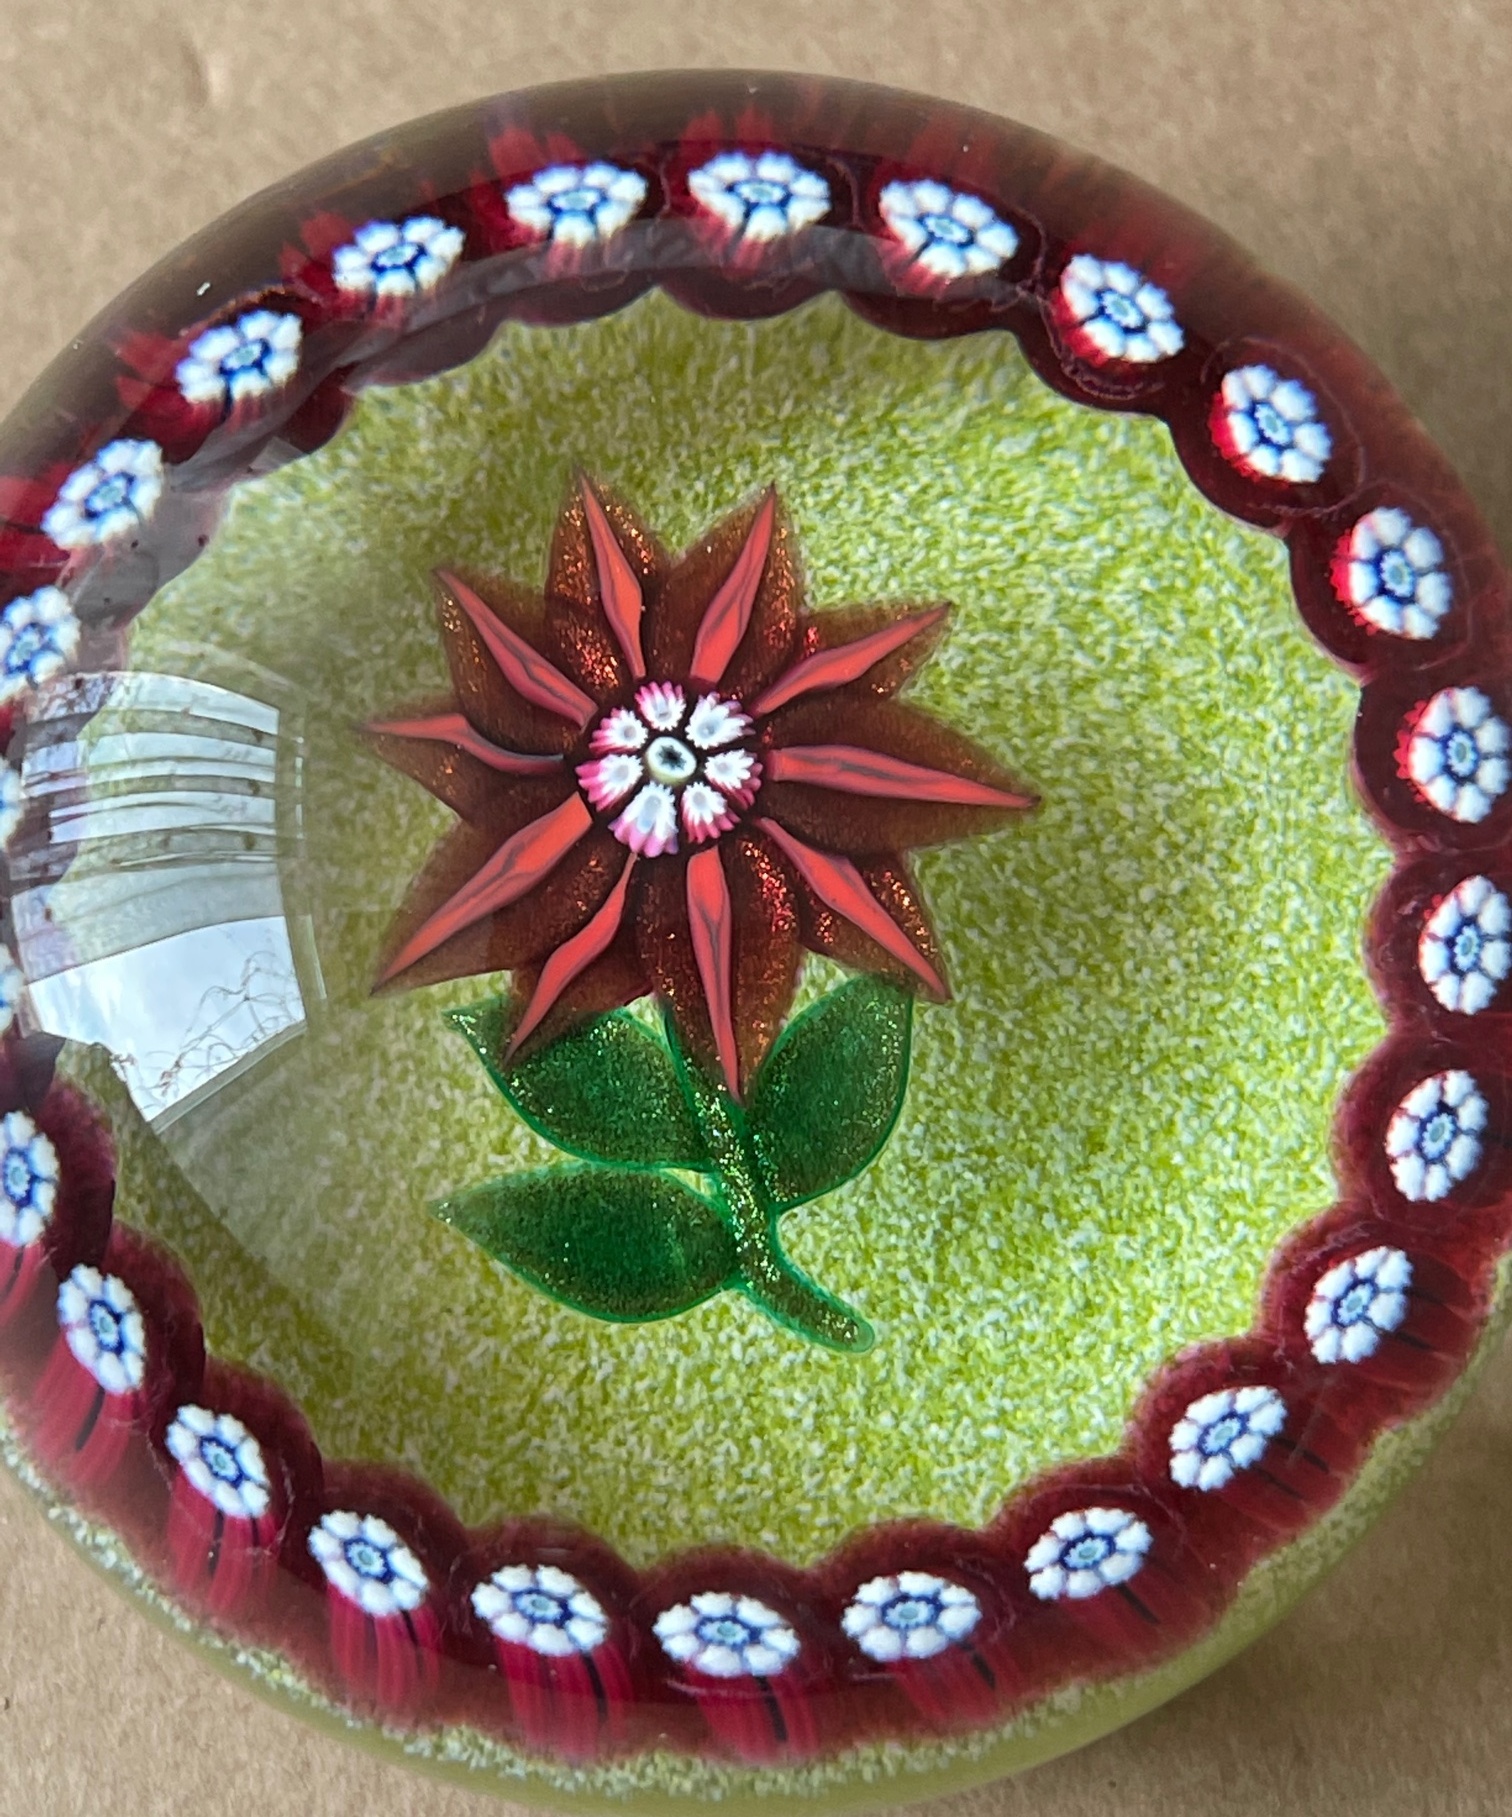 Vintage Paul Ysart (PY) Made in Scotland Flower Paperweight - approx 65 mm diameter and 50mm tall.